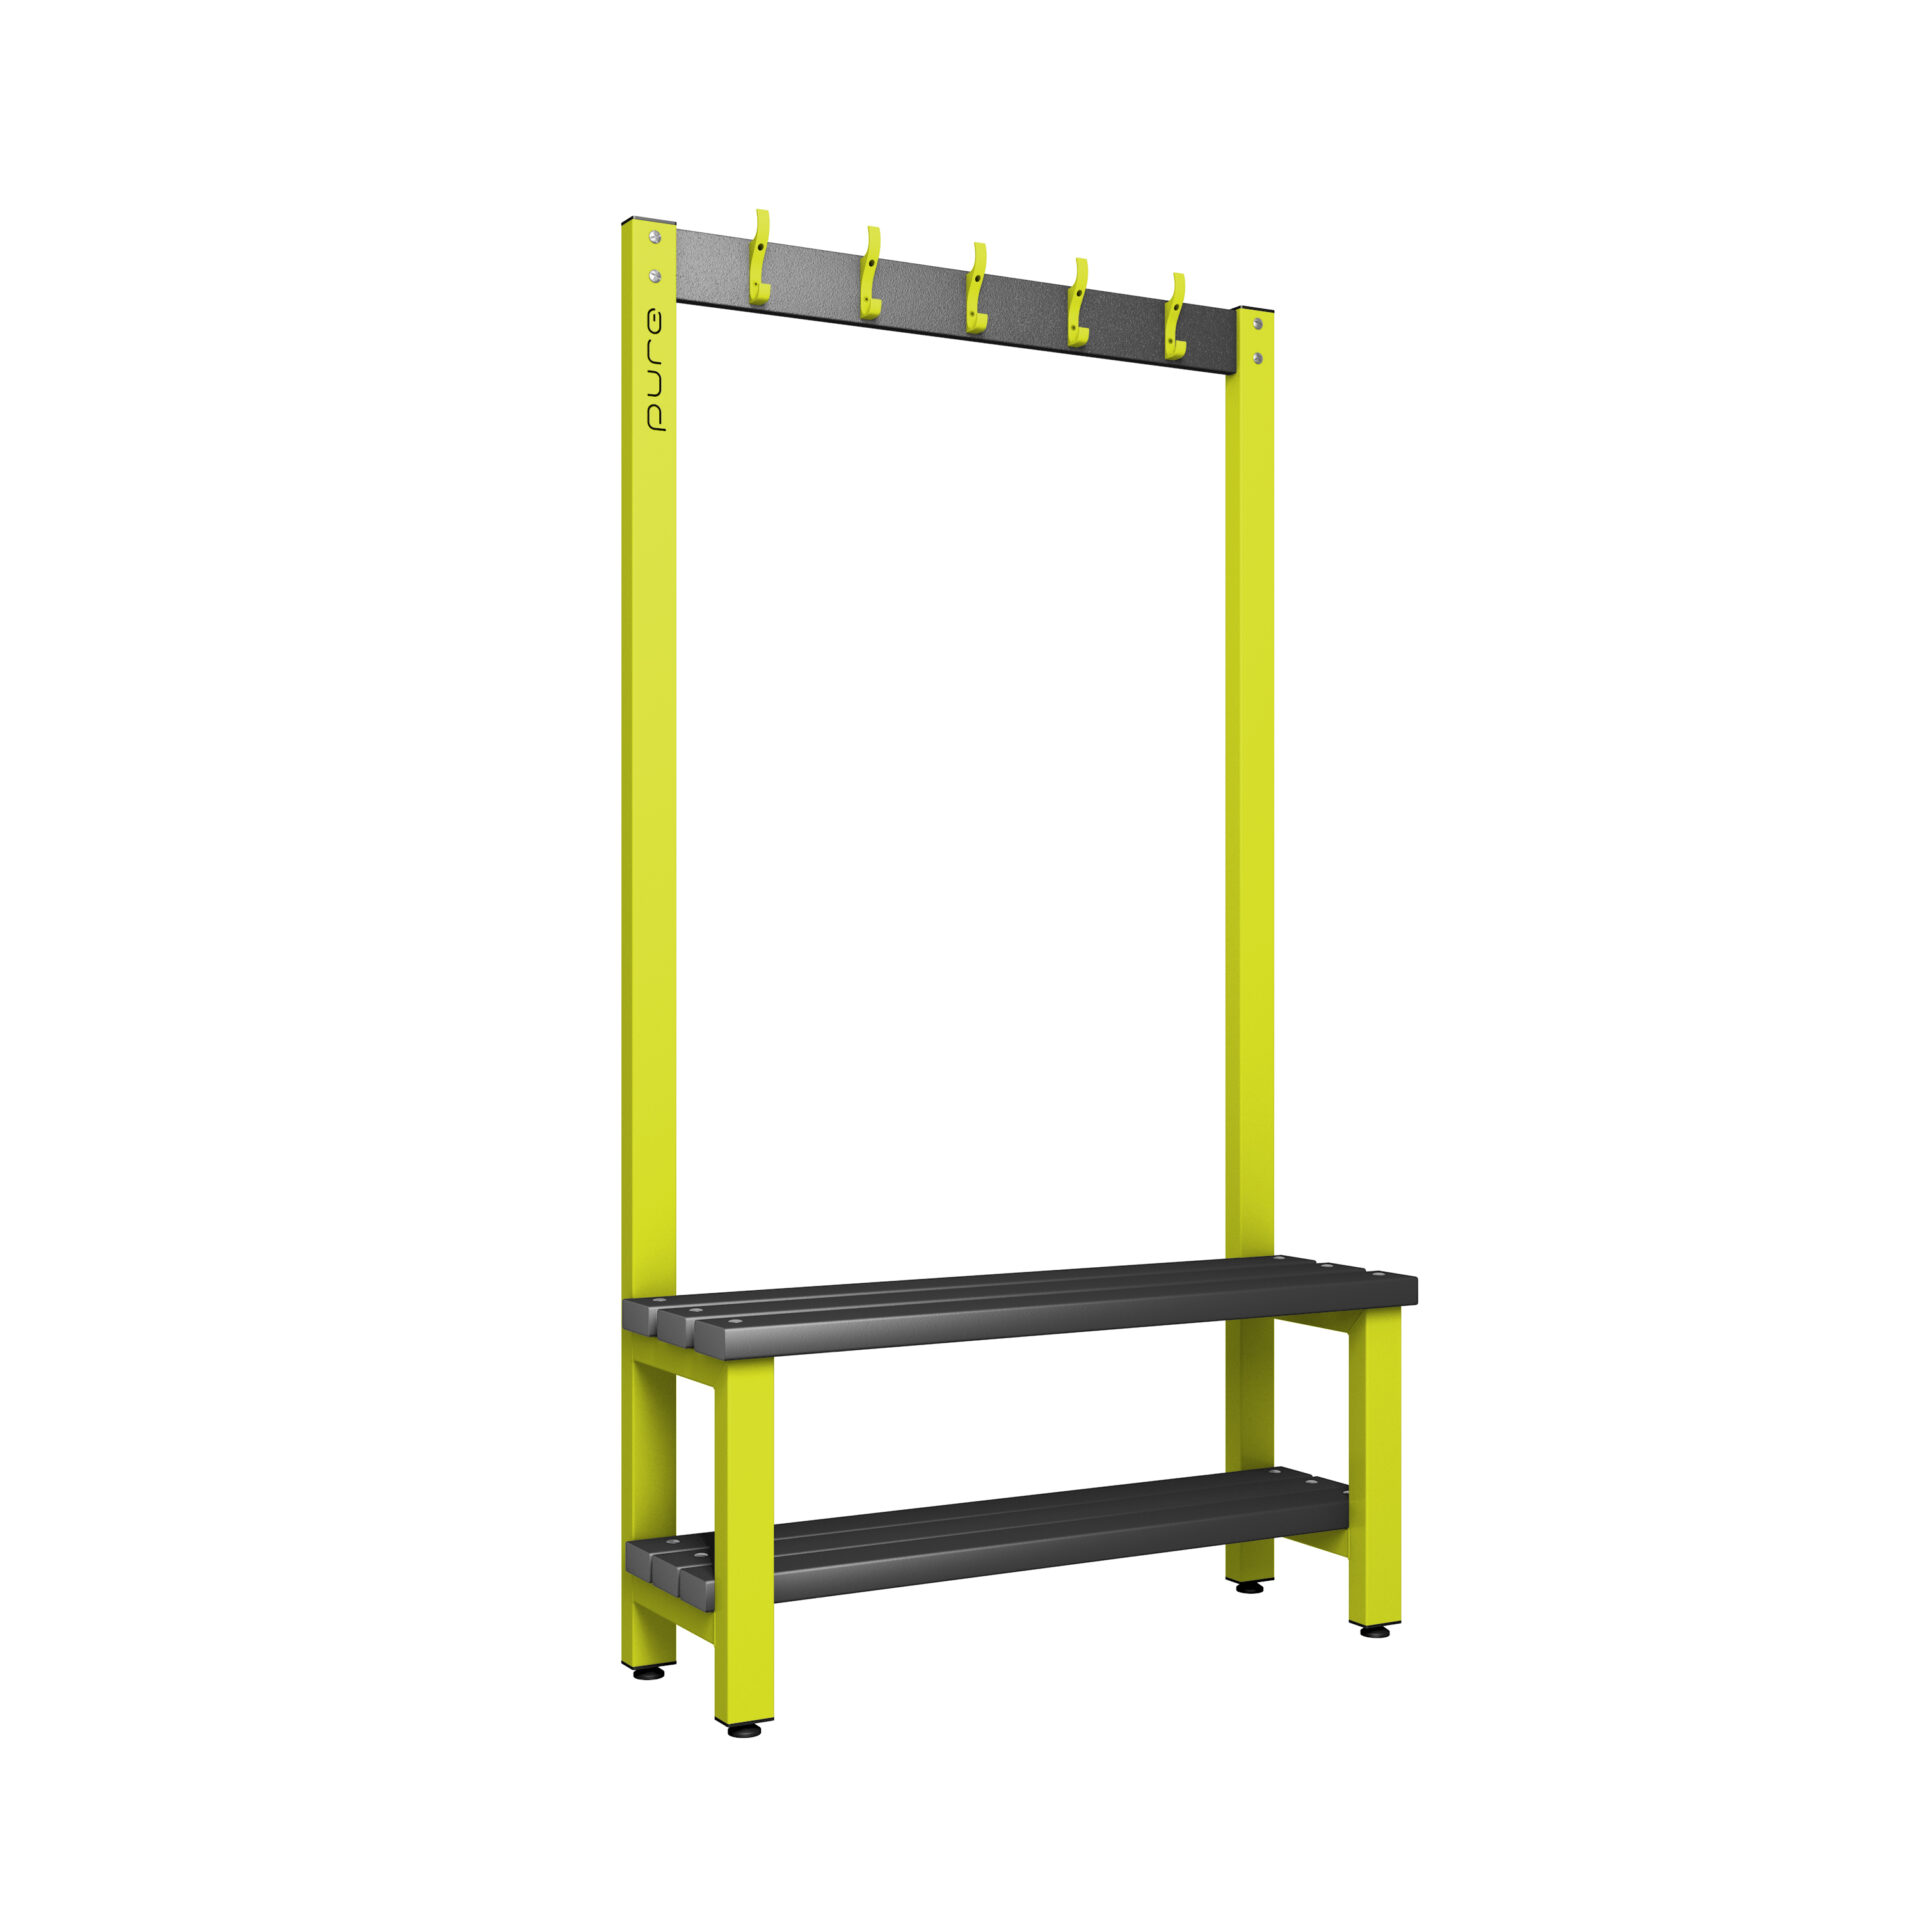 Pure Carbon Zero Single Sided 1000mm 5 Hook Bench With Shoe Shelf